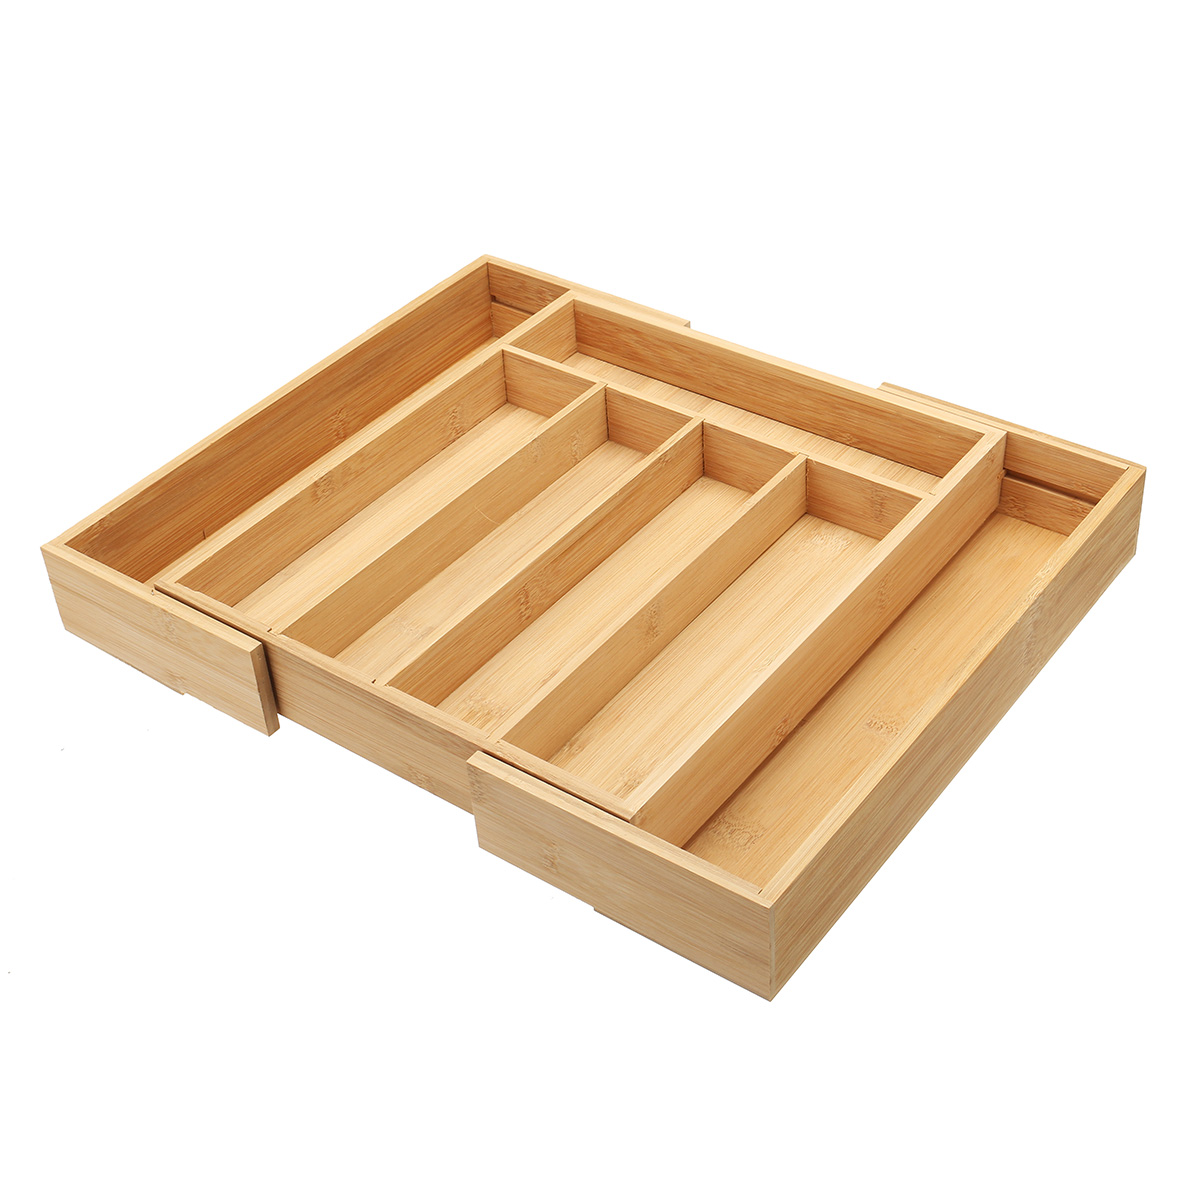 7-Cells-Wooden-Cutlery-Drawer-Draw-Organiser-Bamboo-Expandable-Tray-1753783-6